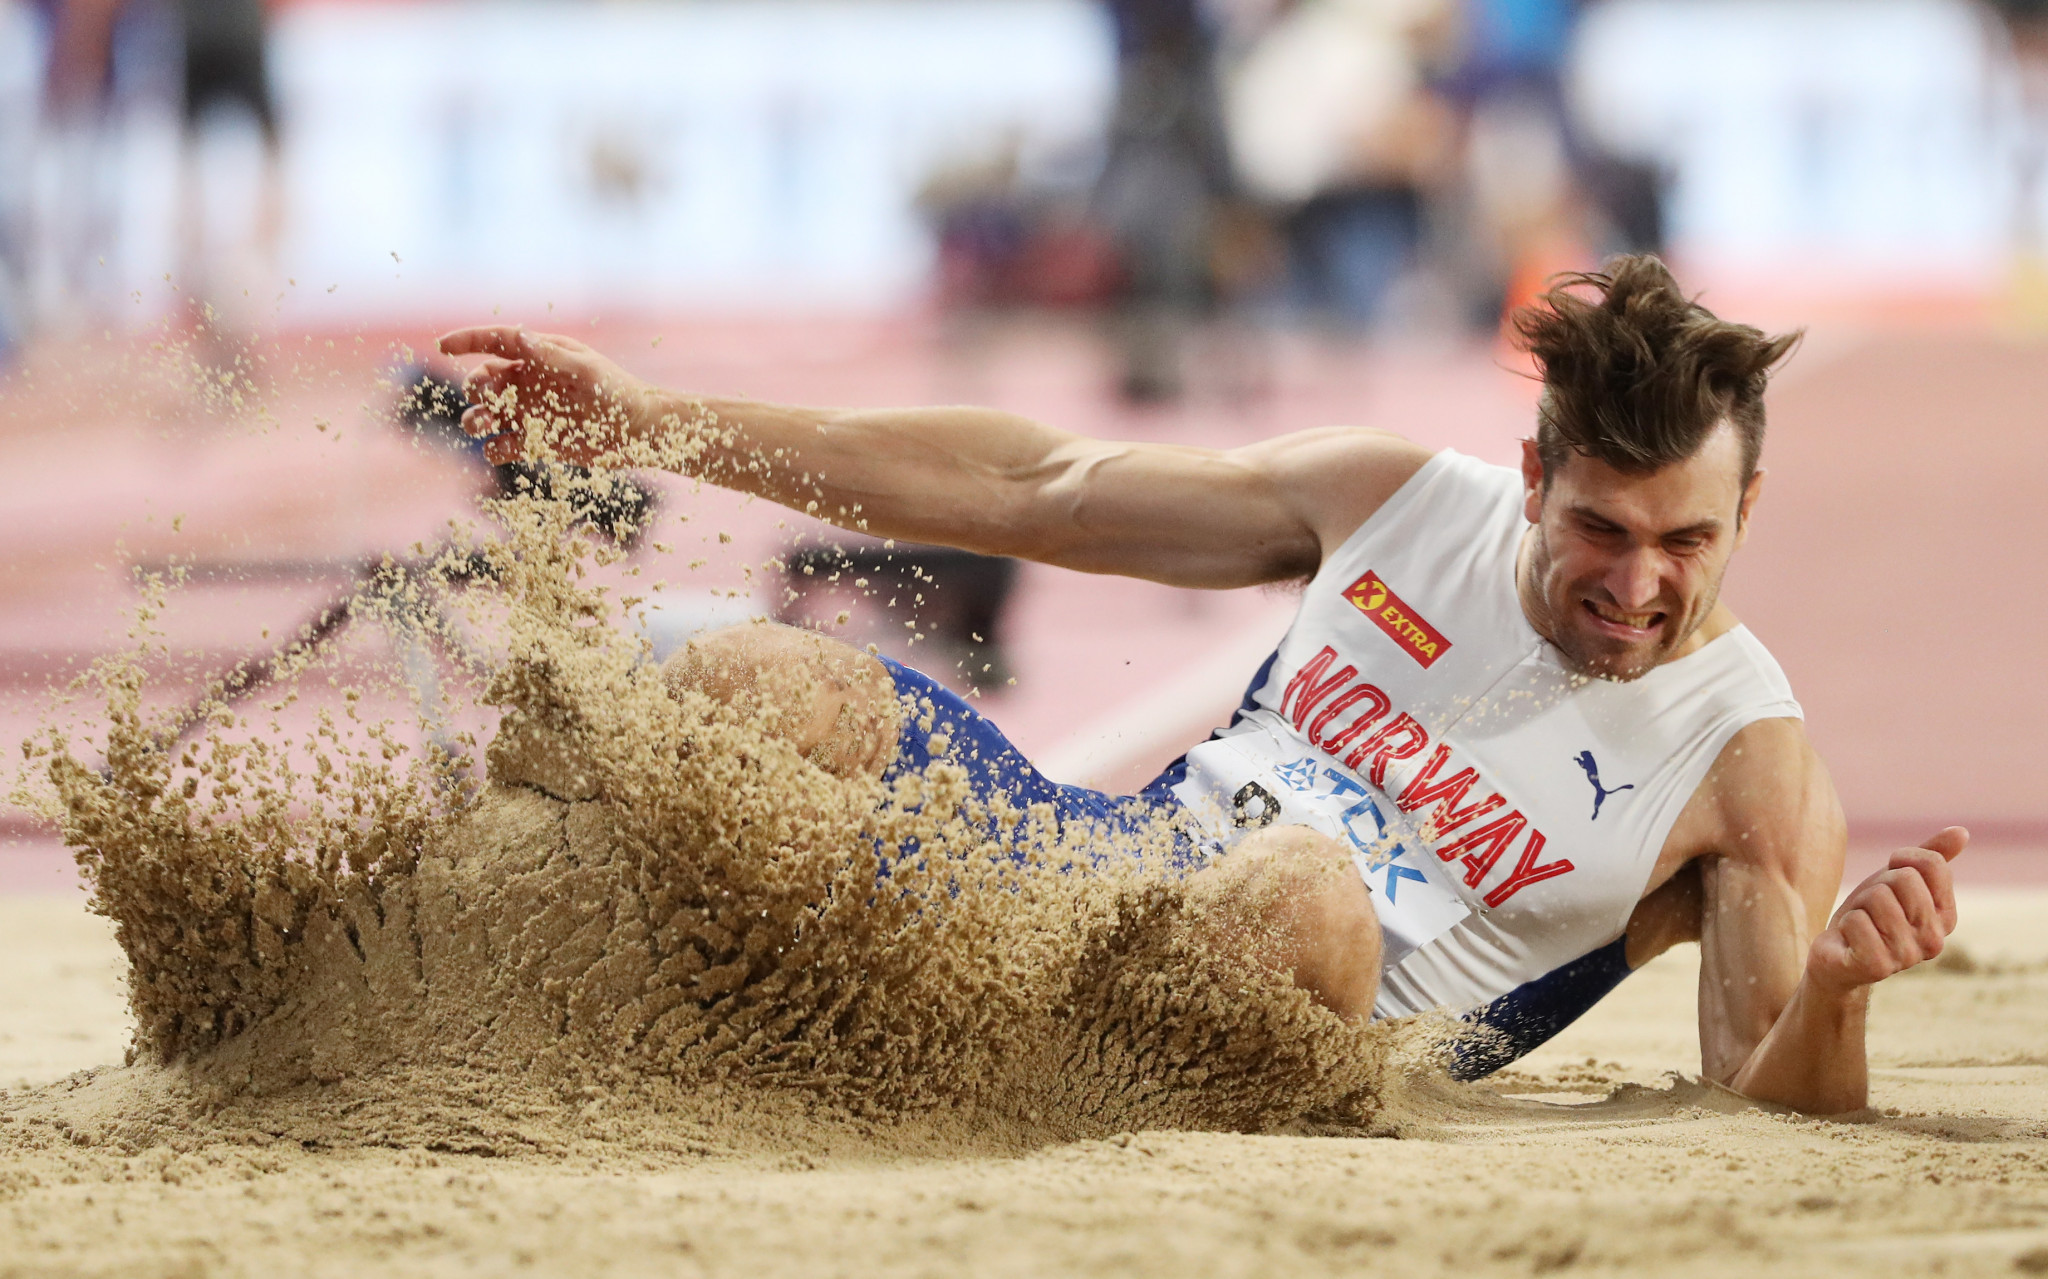 Martin Roe came out on top in the long jump as he moved ahead of his decathlon rivals ©Getty Images